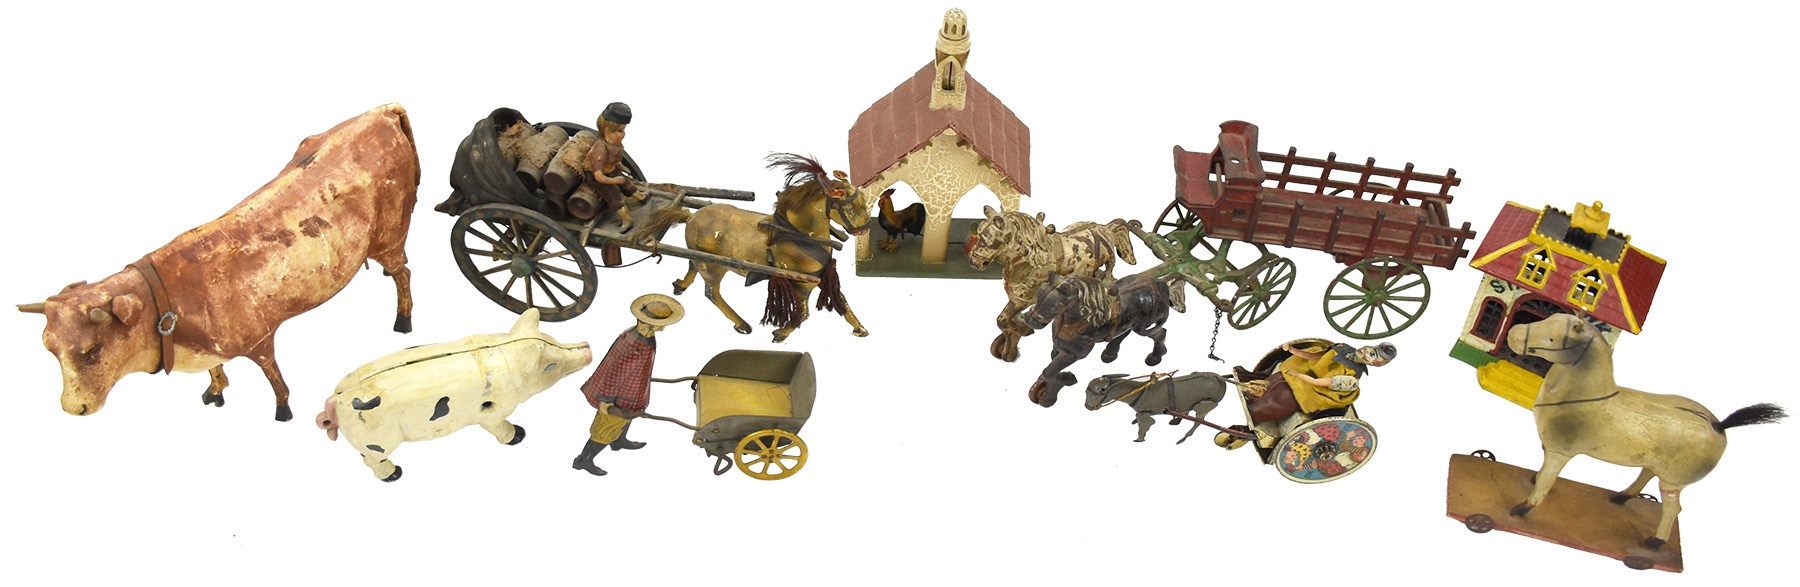 - 19th & Early 20th Century Toys from Prominent American Family